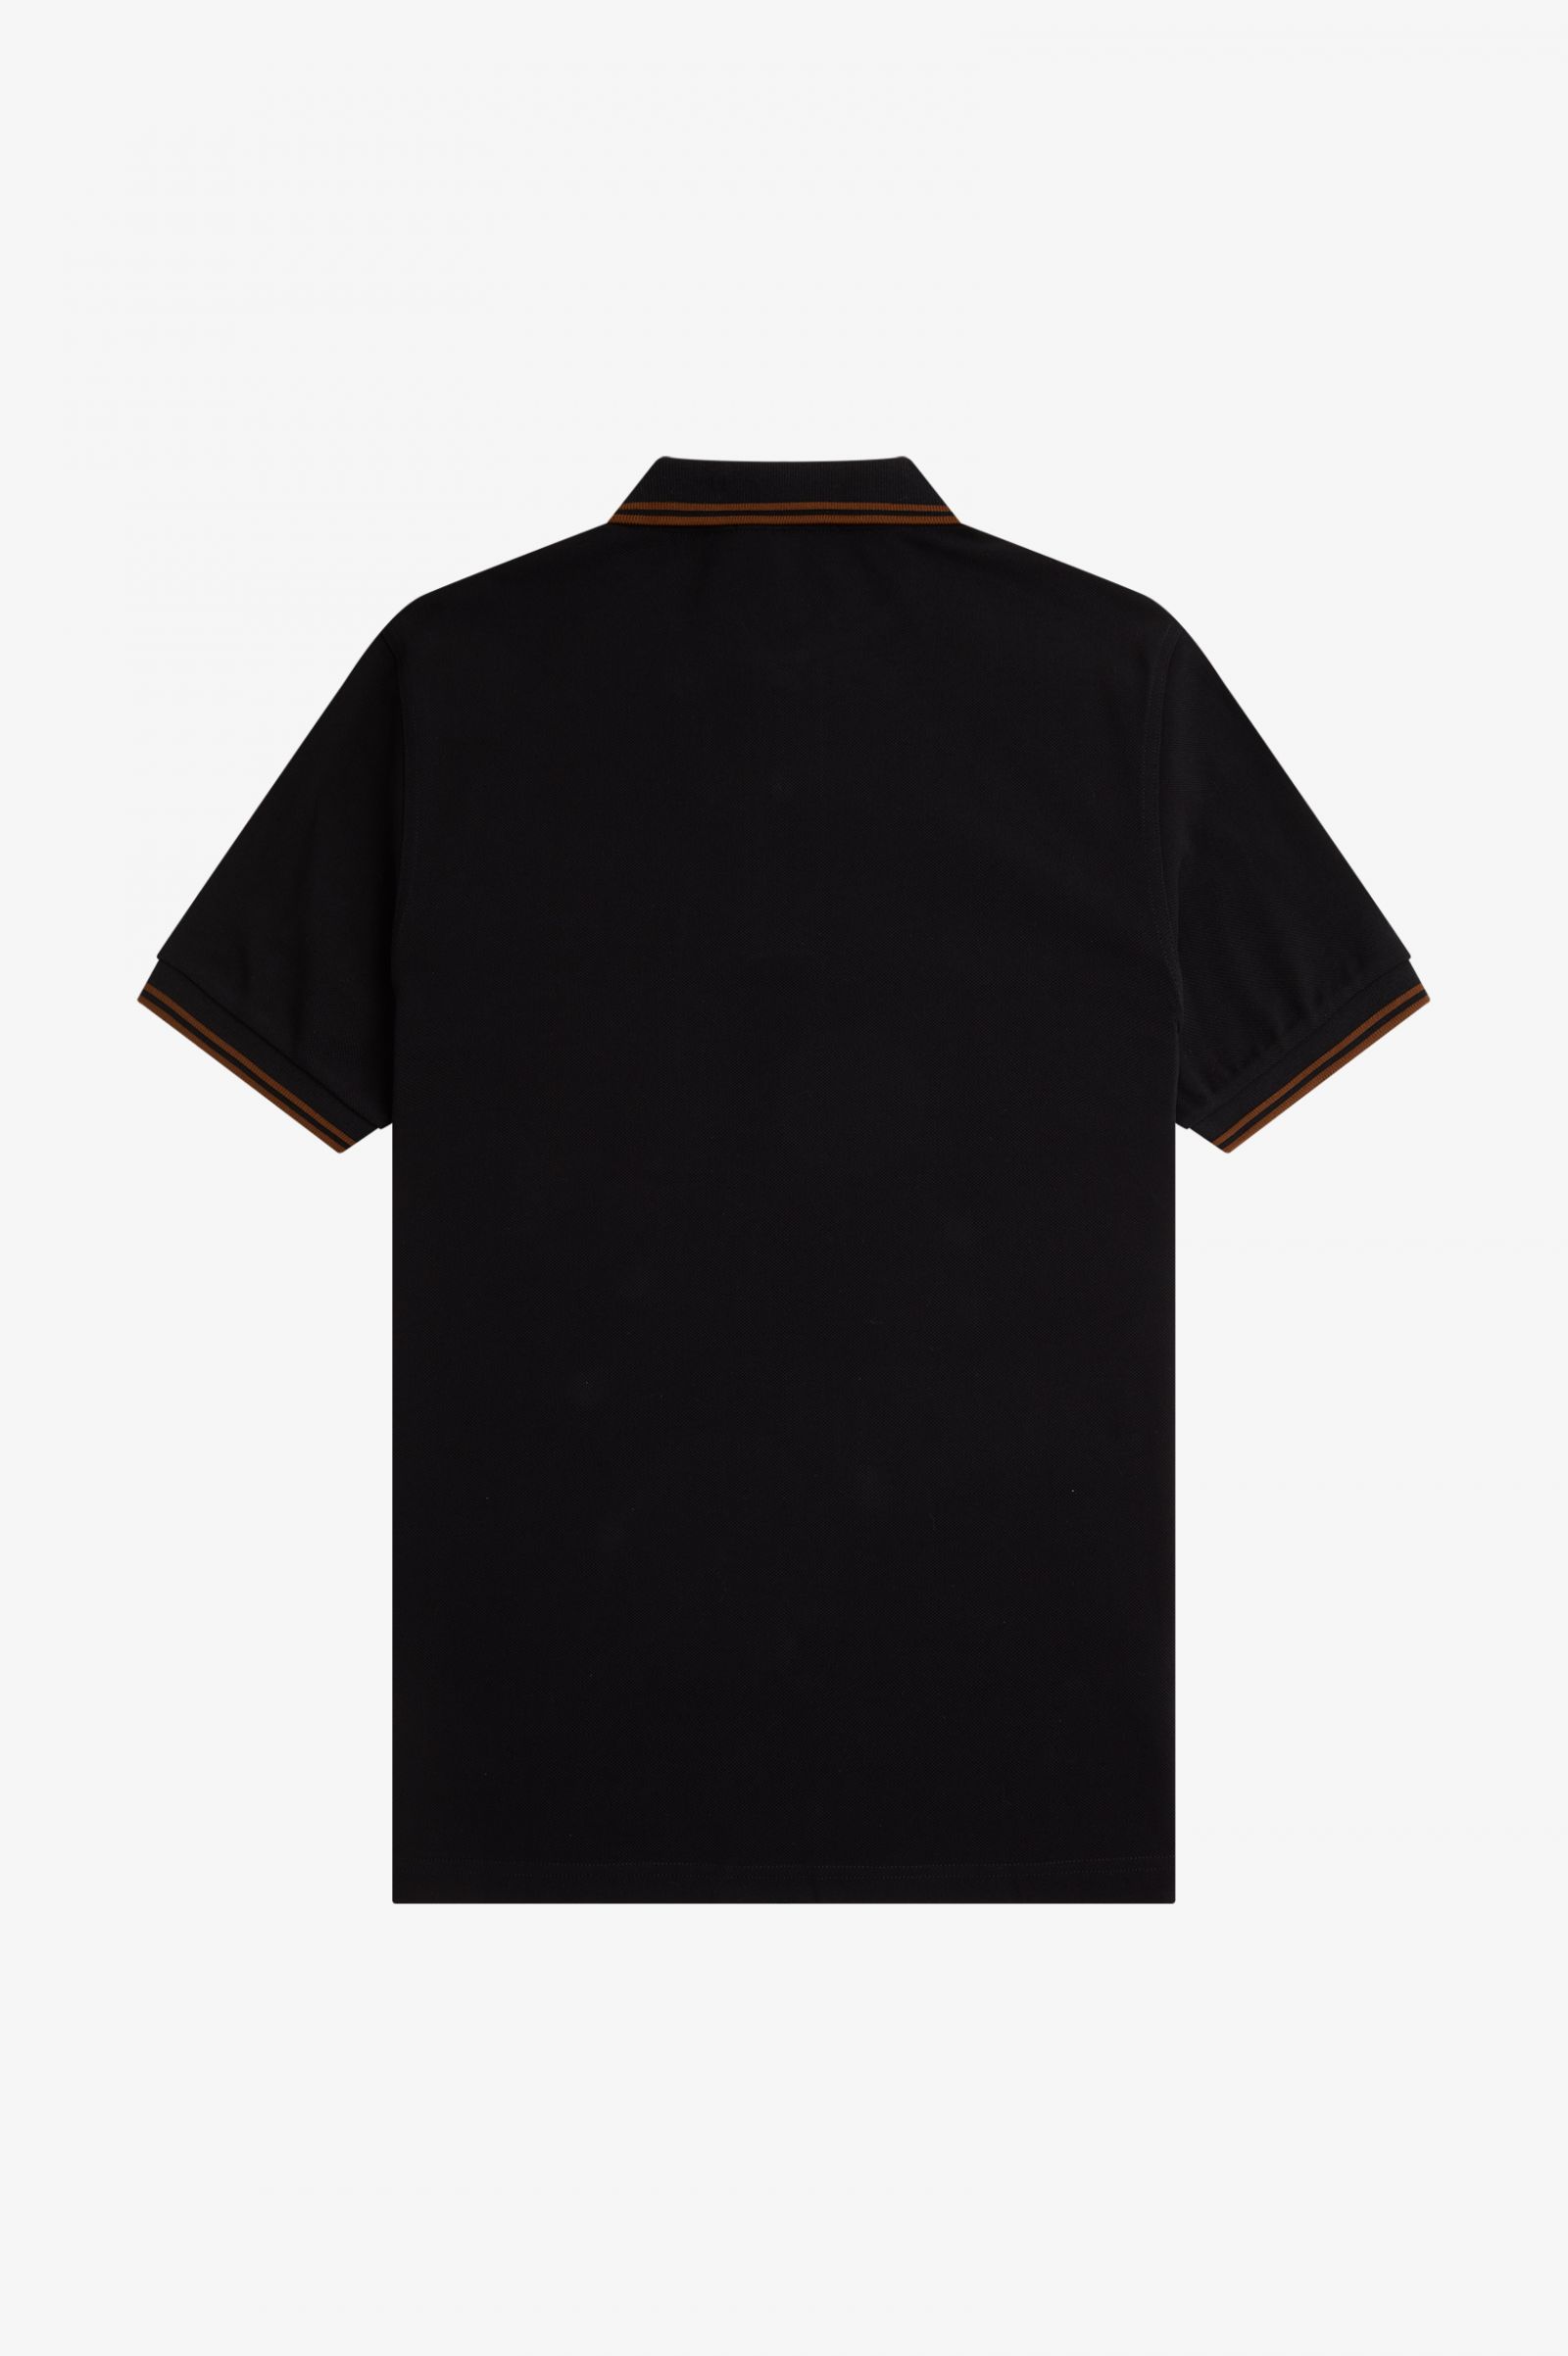 Twin Twipped Fred Perry Shirt in Black 